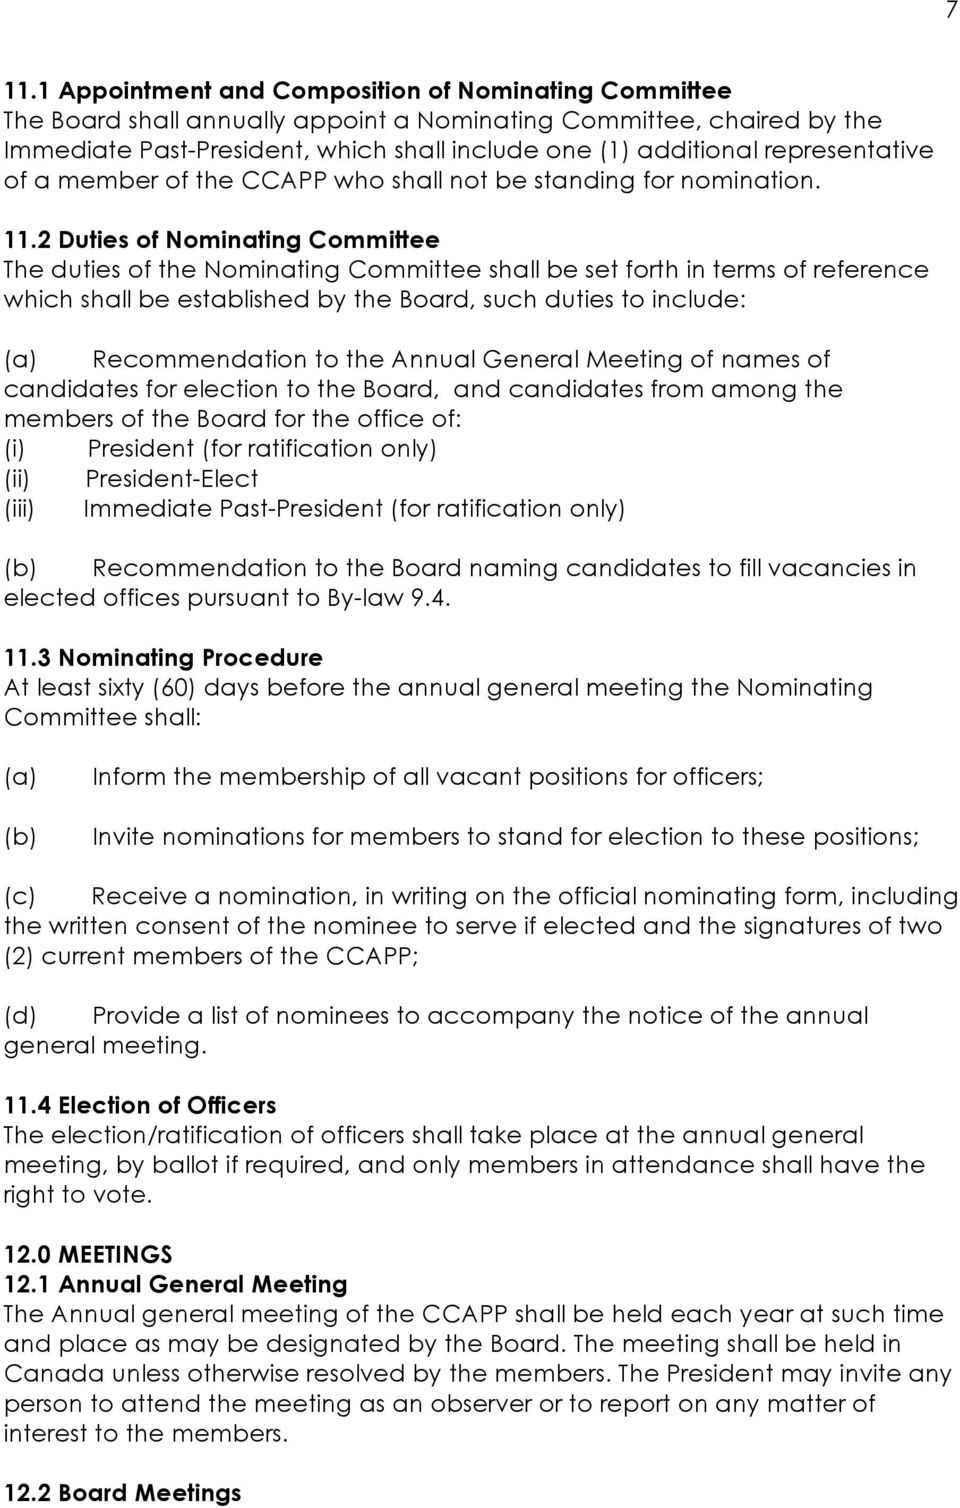 2 Duties of Nominating Committee The duties of the Nominating Committee shall be set forth in terms of reference which shall be established by the Board, such duties to include: (a) Recommendation to